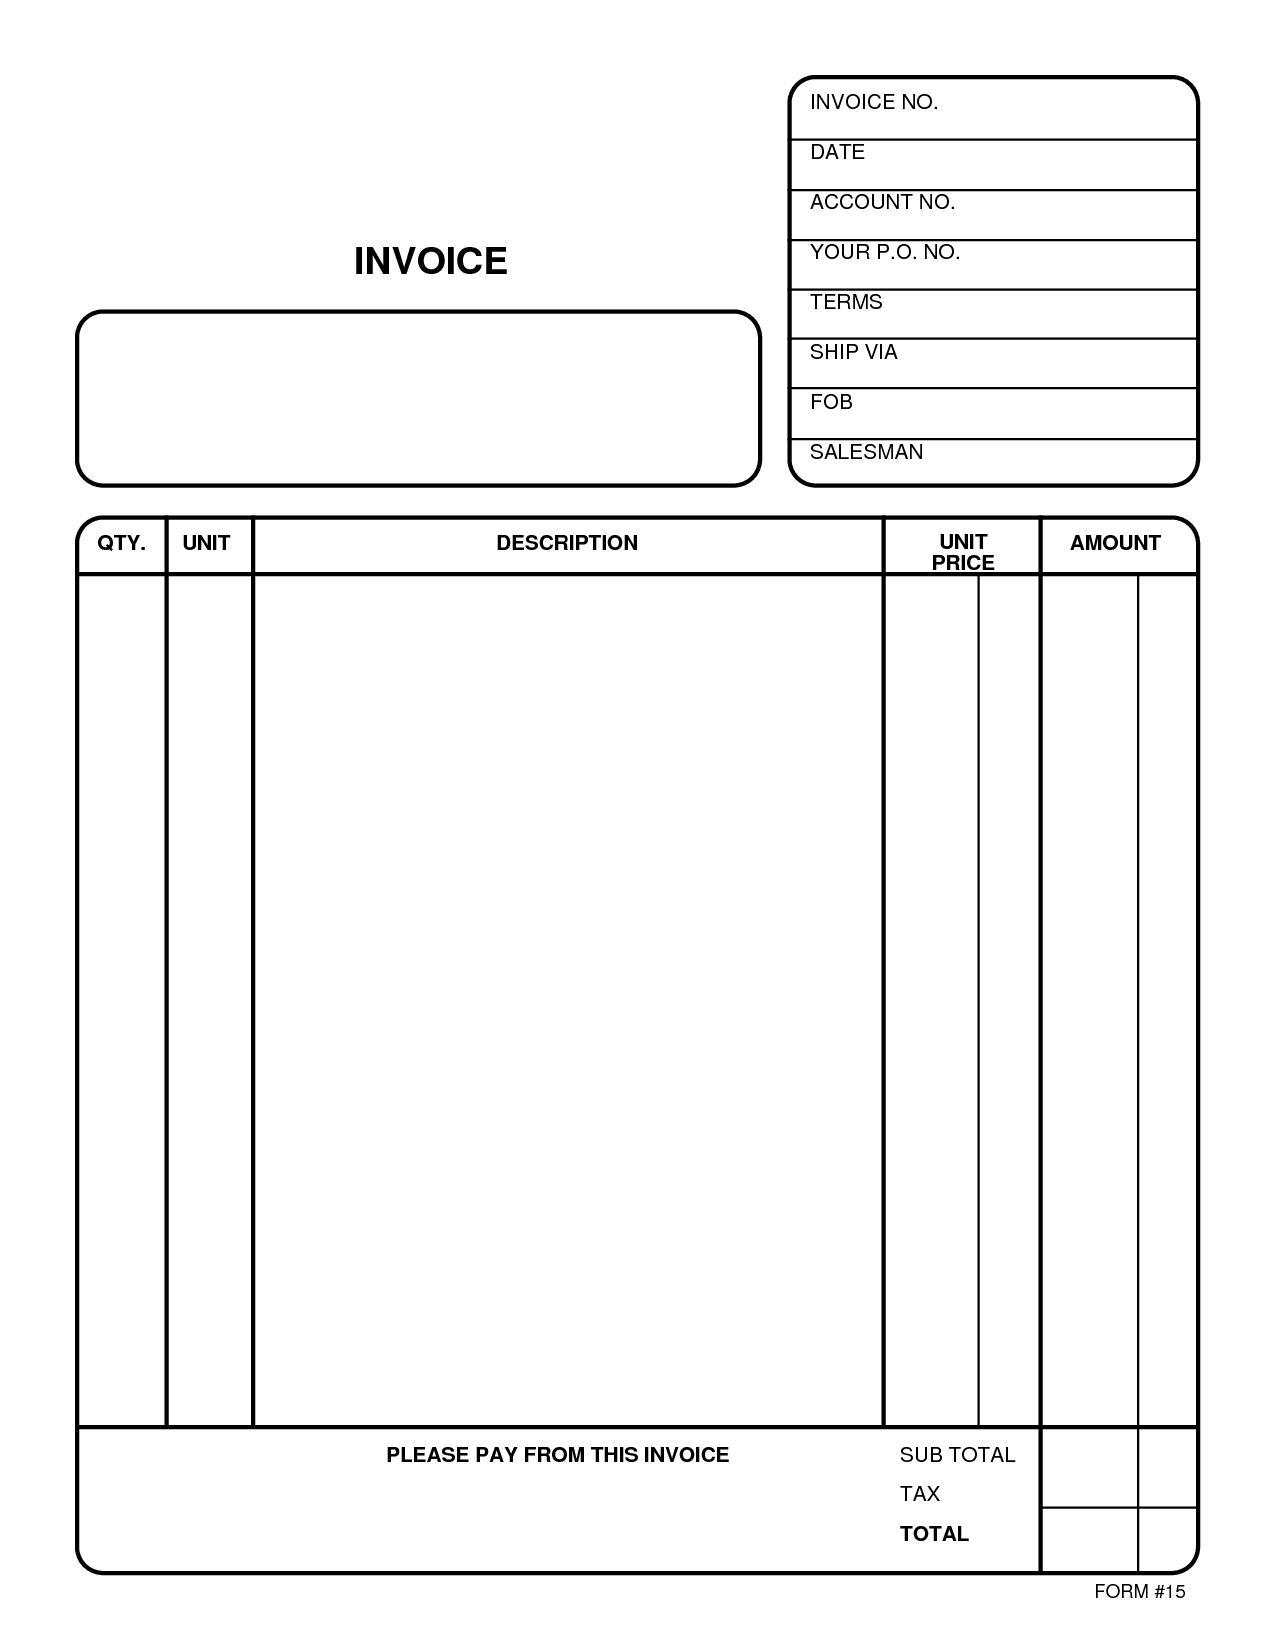 blank invoice template free pdf best business template invoice forms free